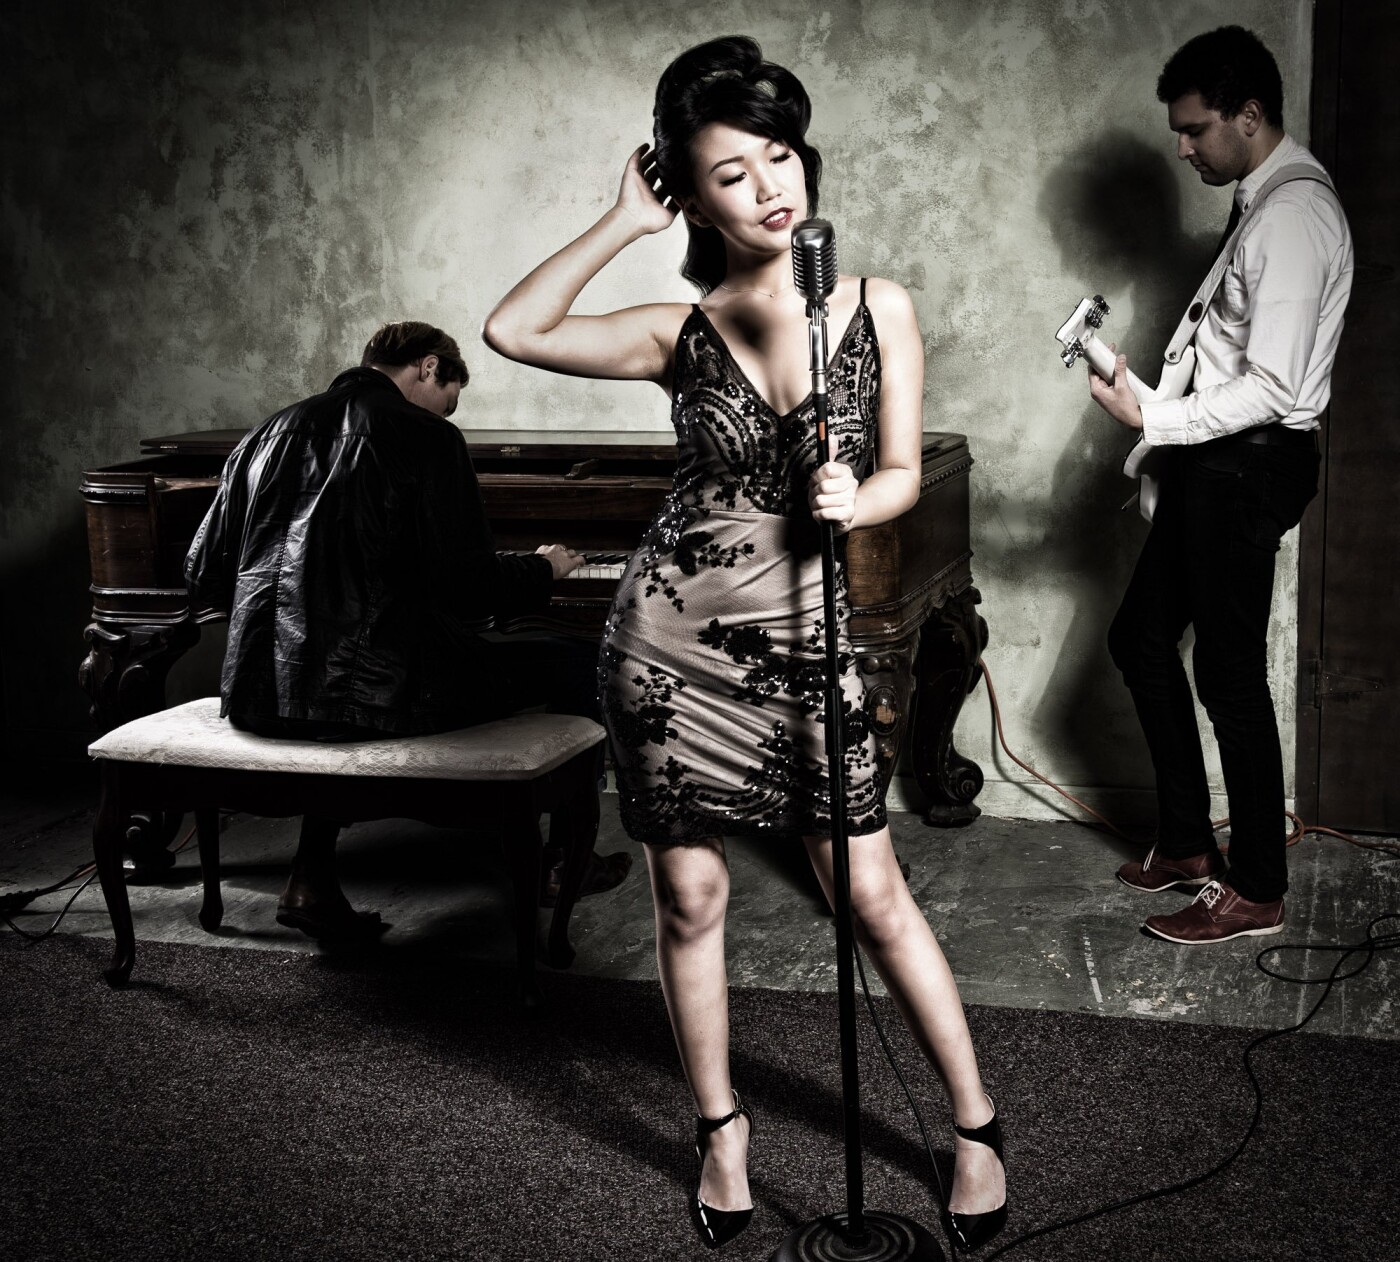 The beautiful, Iris Woo is a singer and model in Vancouver.  The photo session was so special as she performed a number of Jazz standards with heart and soul.  Her presence filled the room.  It is such a privilege to capture her passion and share it with a wider audience. 